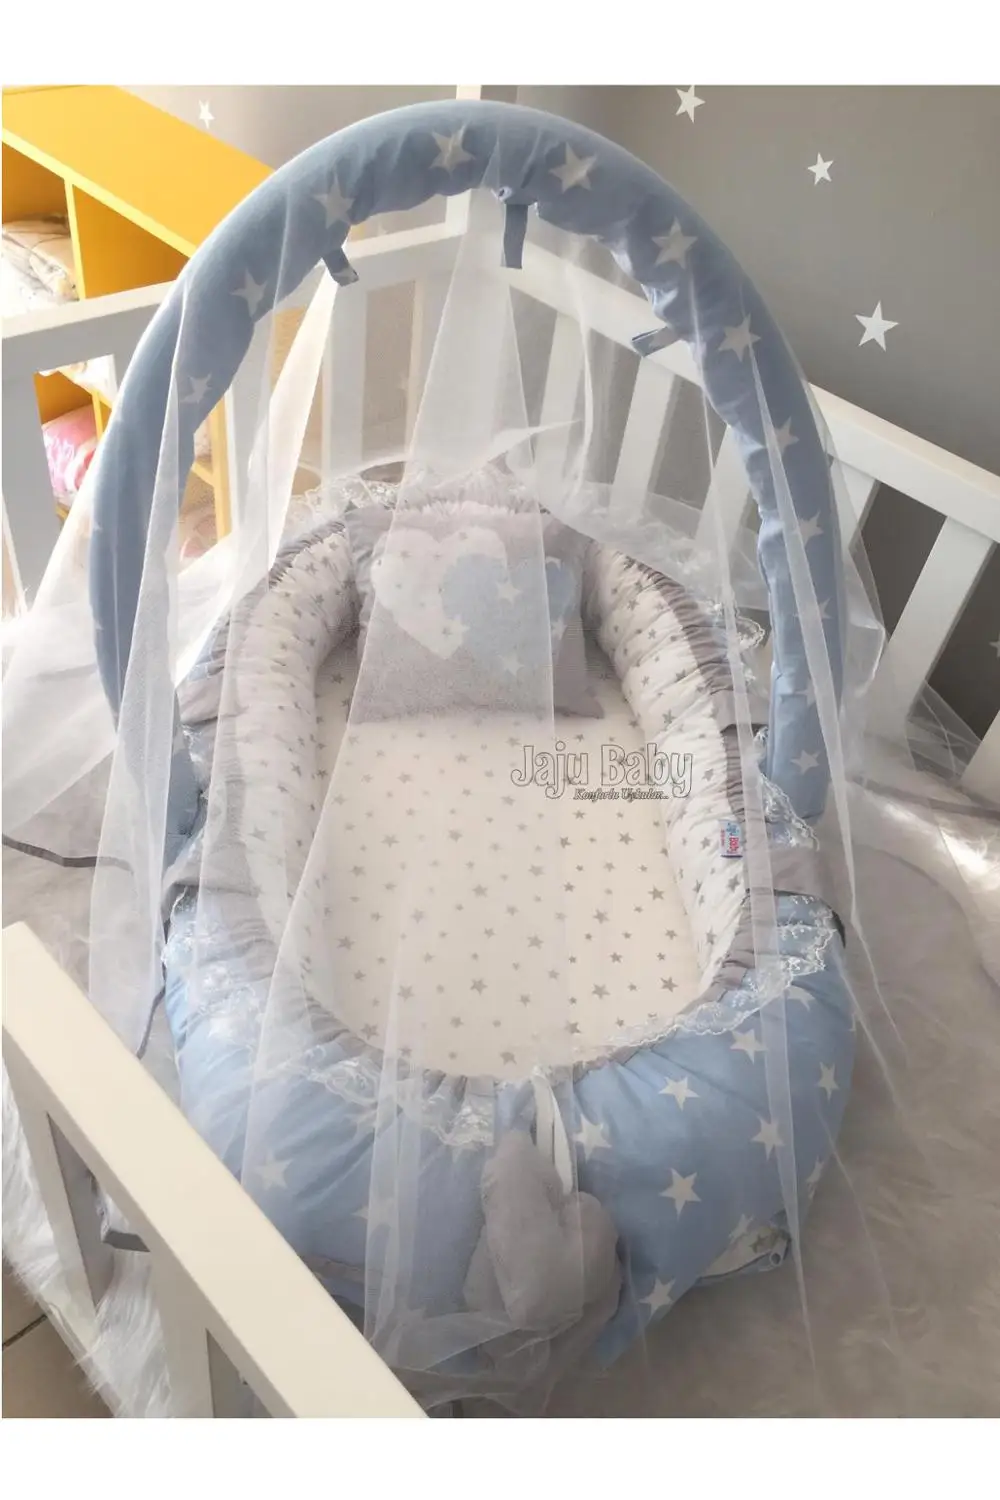 Jaju Baby Handmade Blue-Star Patterned with Mosquito Net and Toy Apparatus Luxury Design Babynest Mother Side Portable Baby Bed